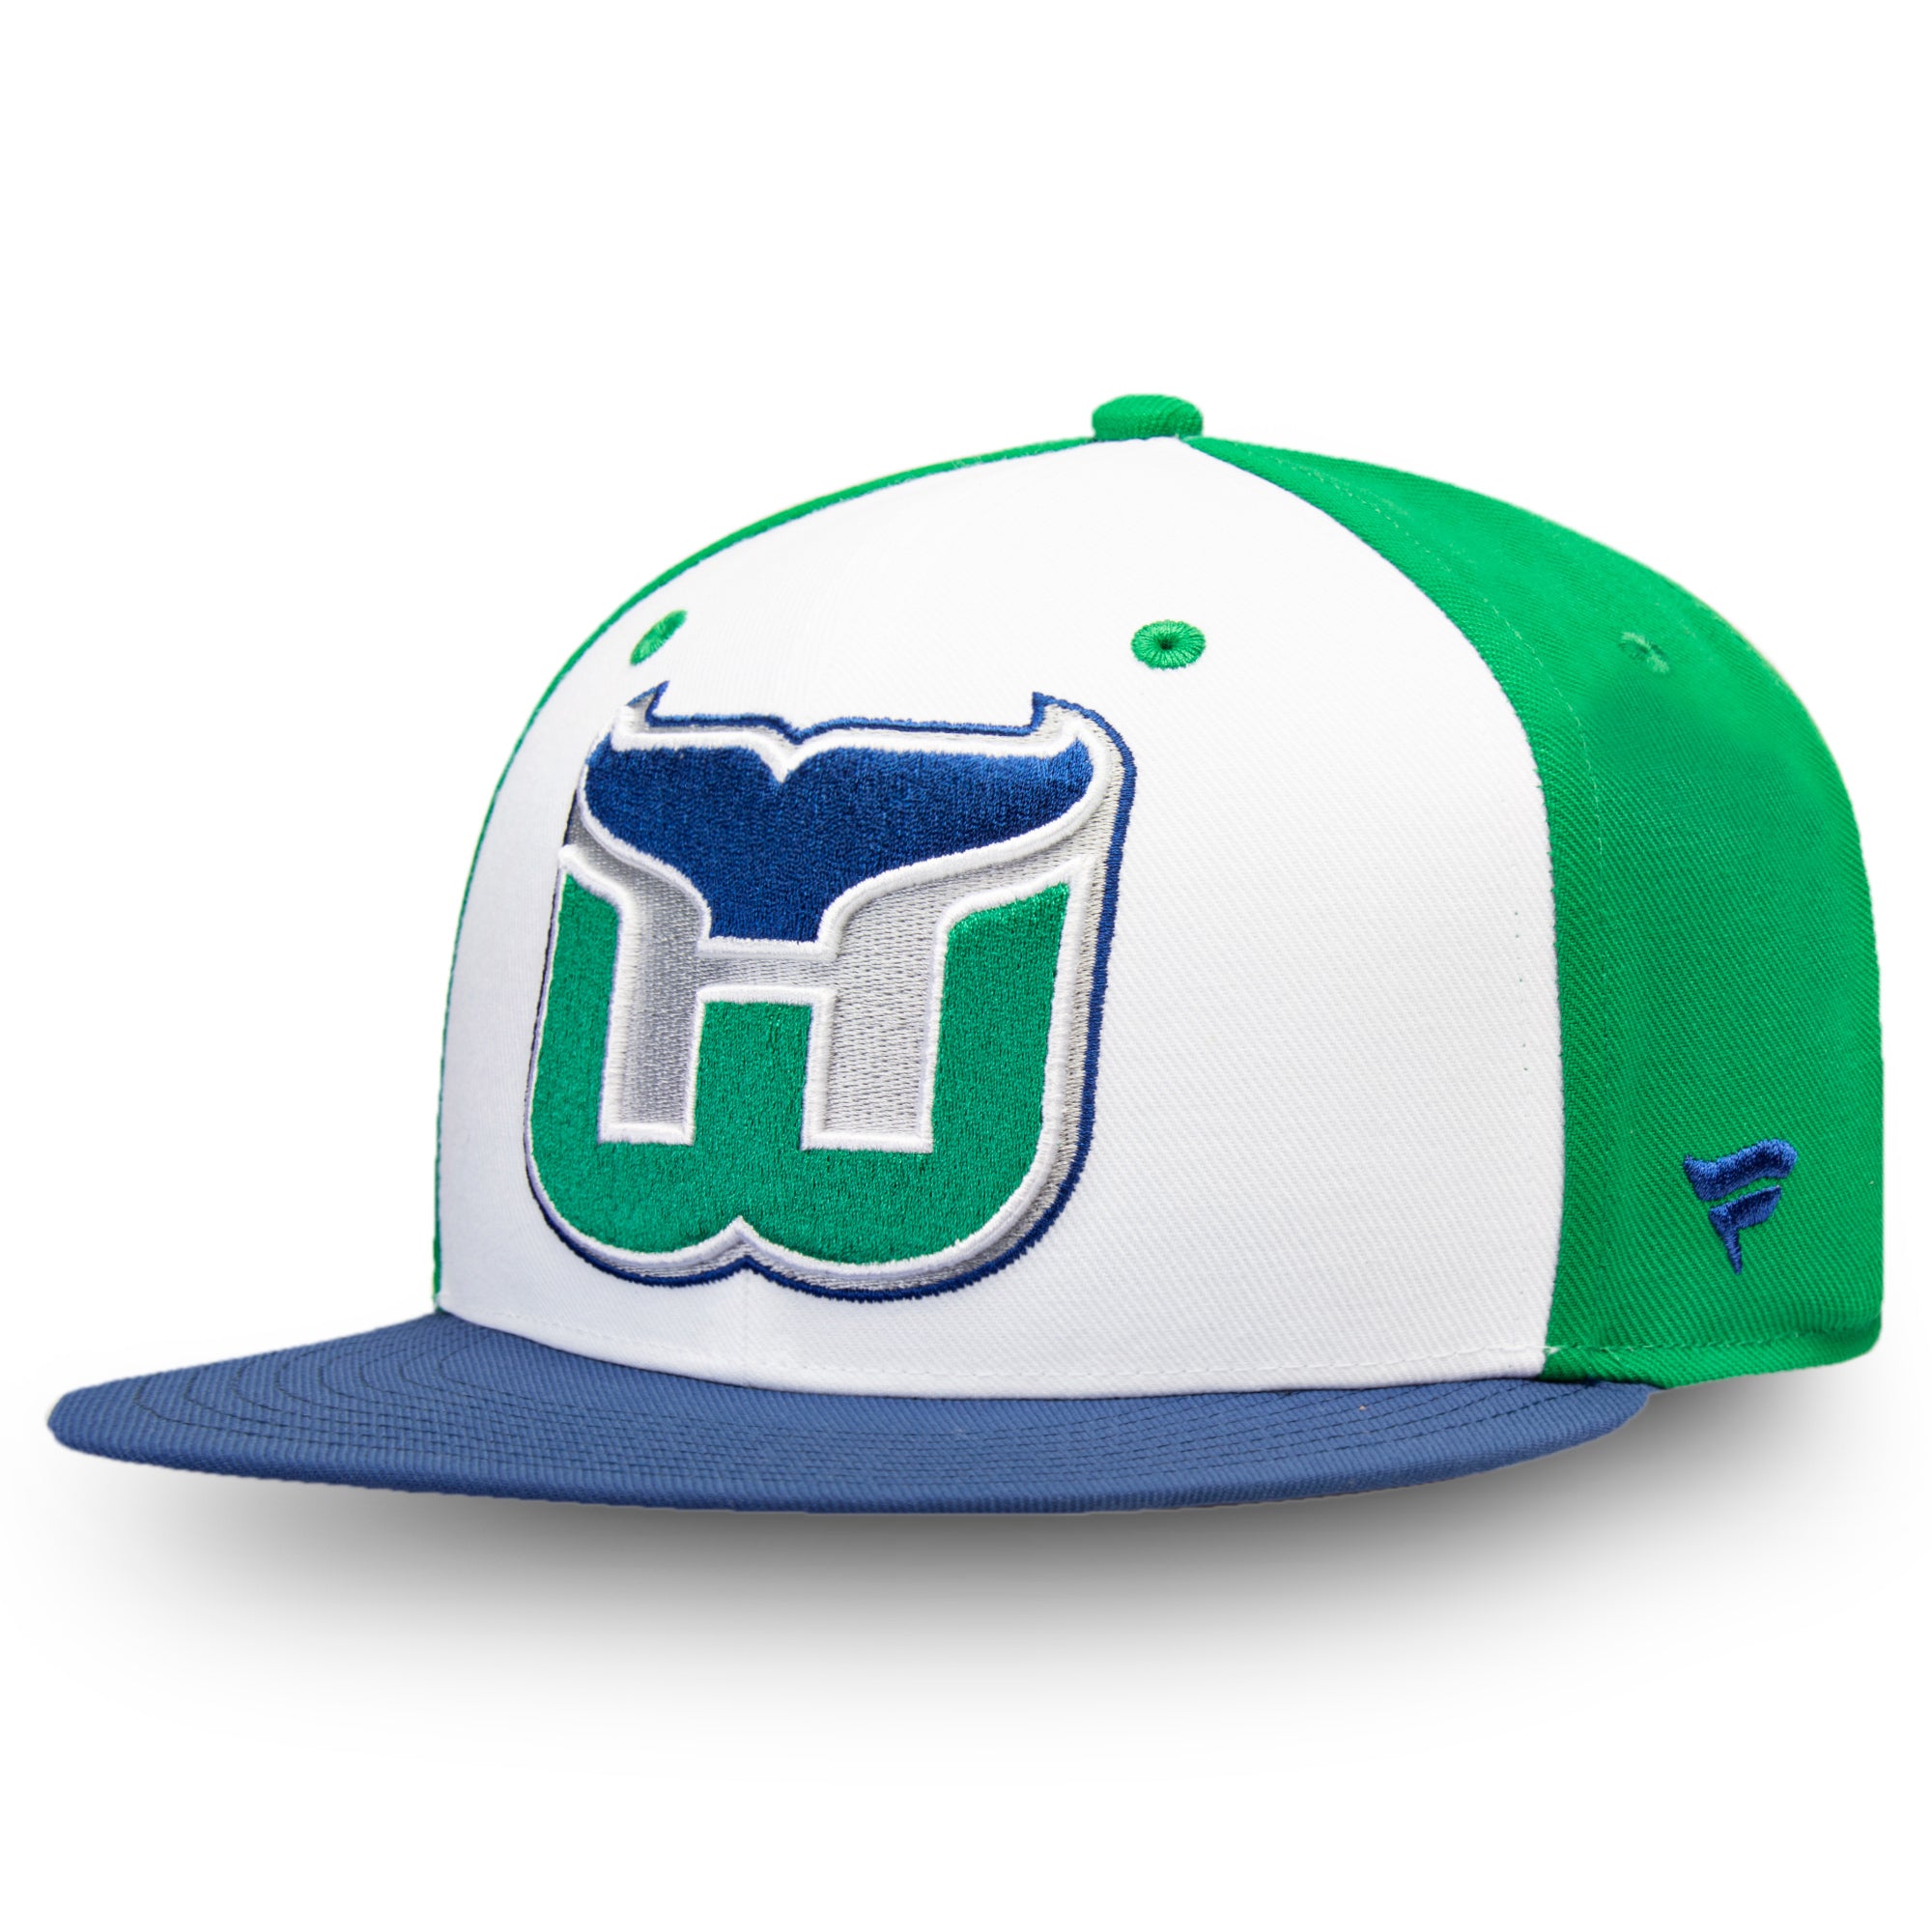 Vintage Hartford Hockey Retro Whalers Cap for Sale by